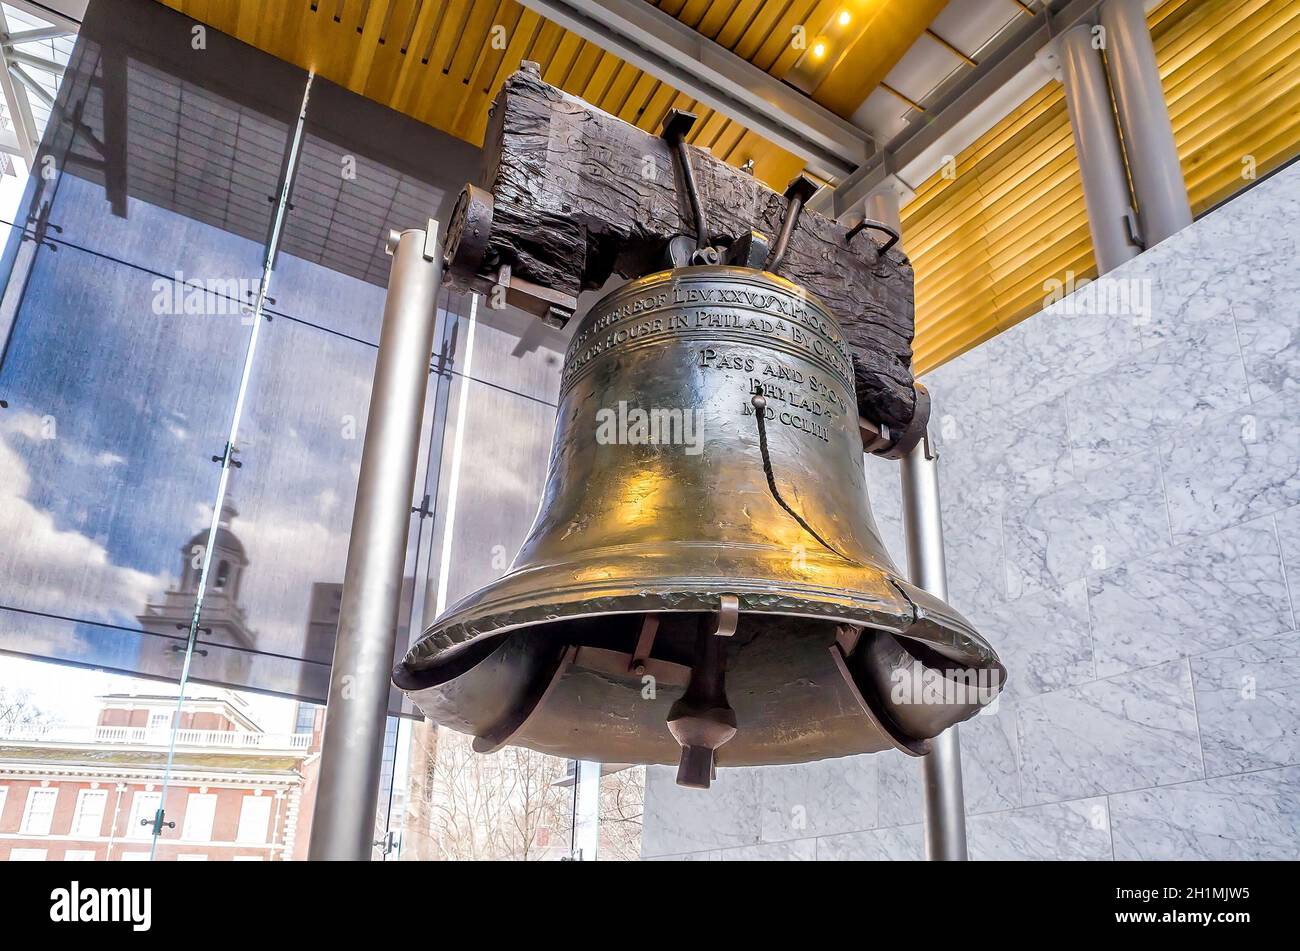 Liberty Bell (267 years old) was made in 1751, symbol of American freedom in Independence Mall building in Philadelphia, Pennsylvania USA Stock Photo